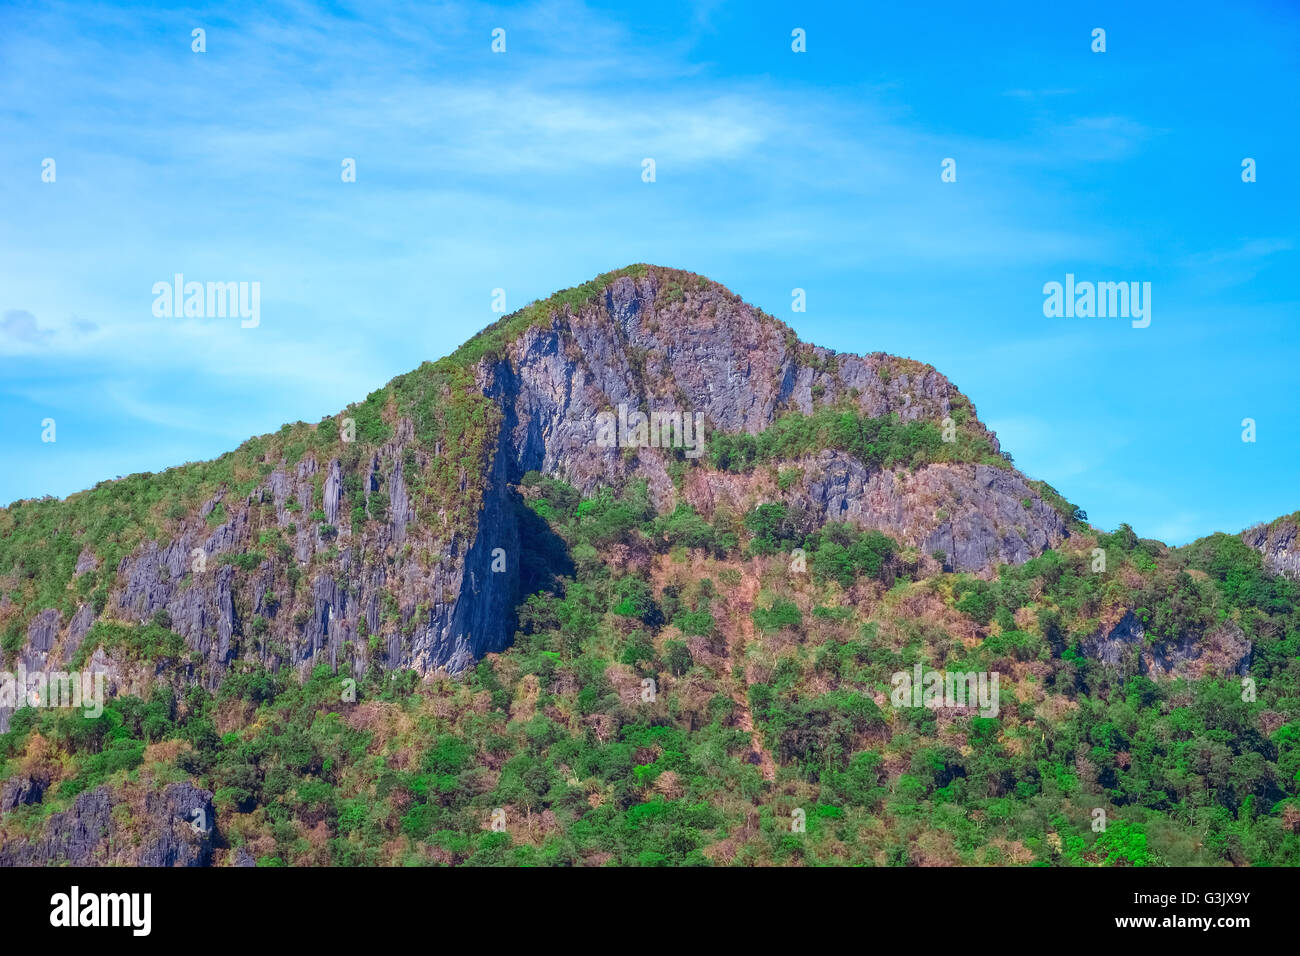 Mountain with green tropical forest, Palawan, Philippines Stock Photo